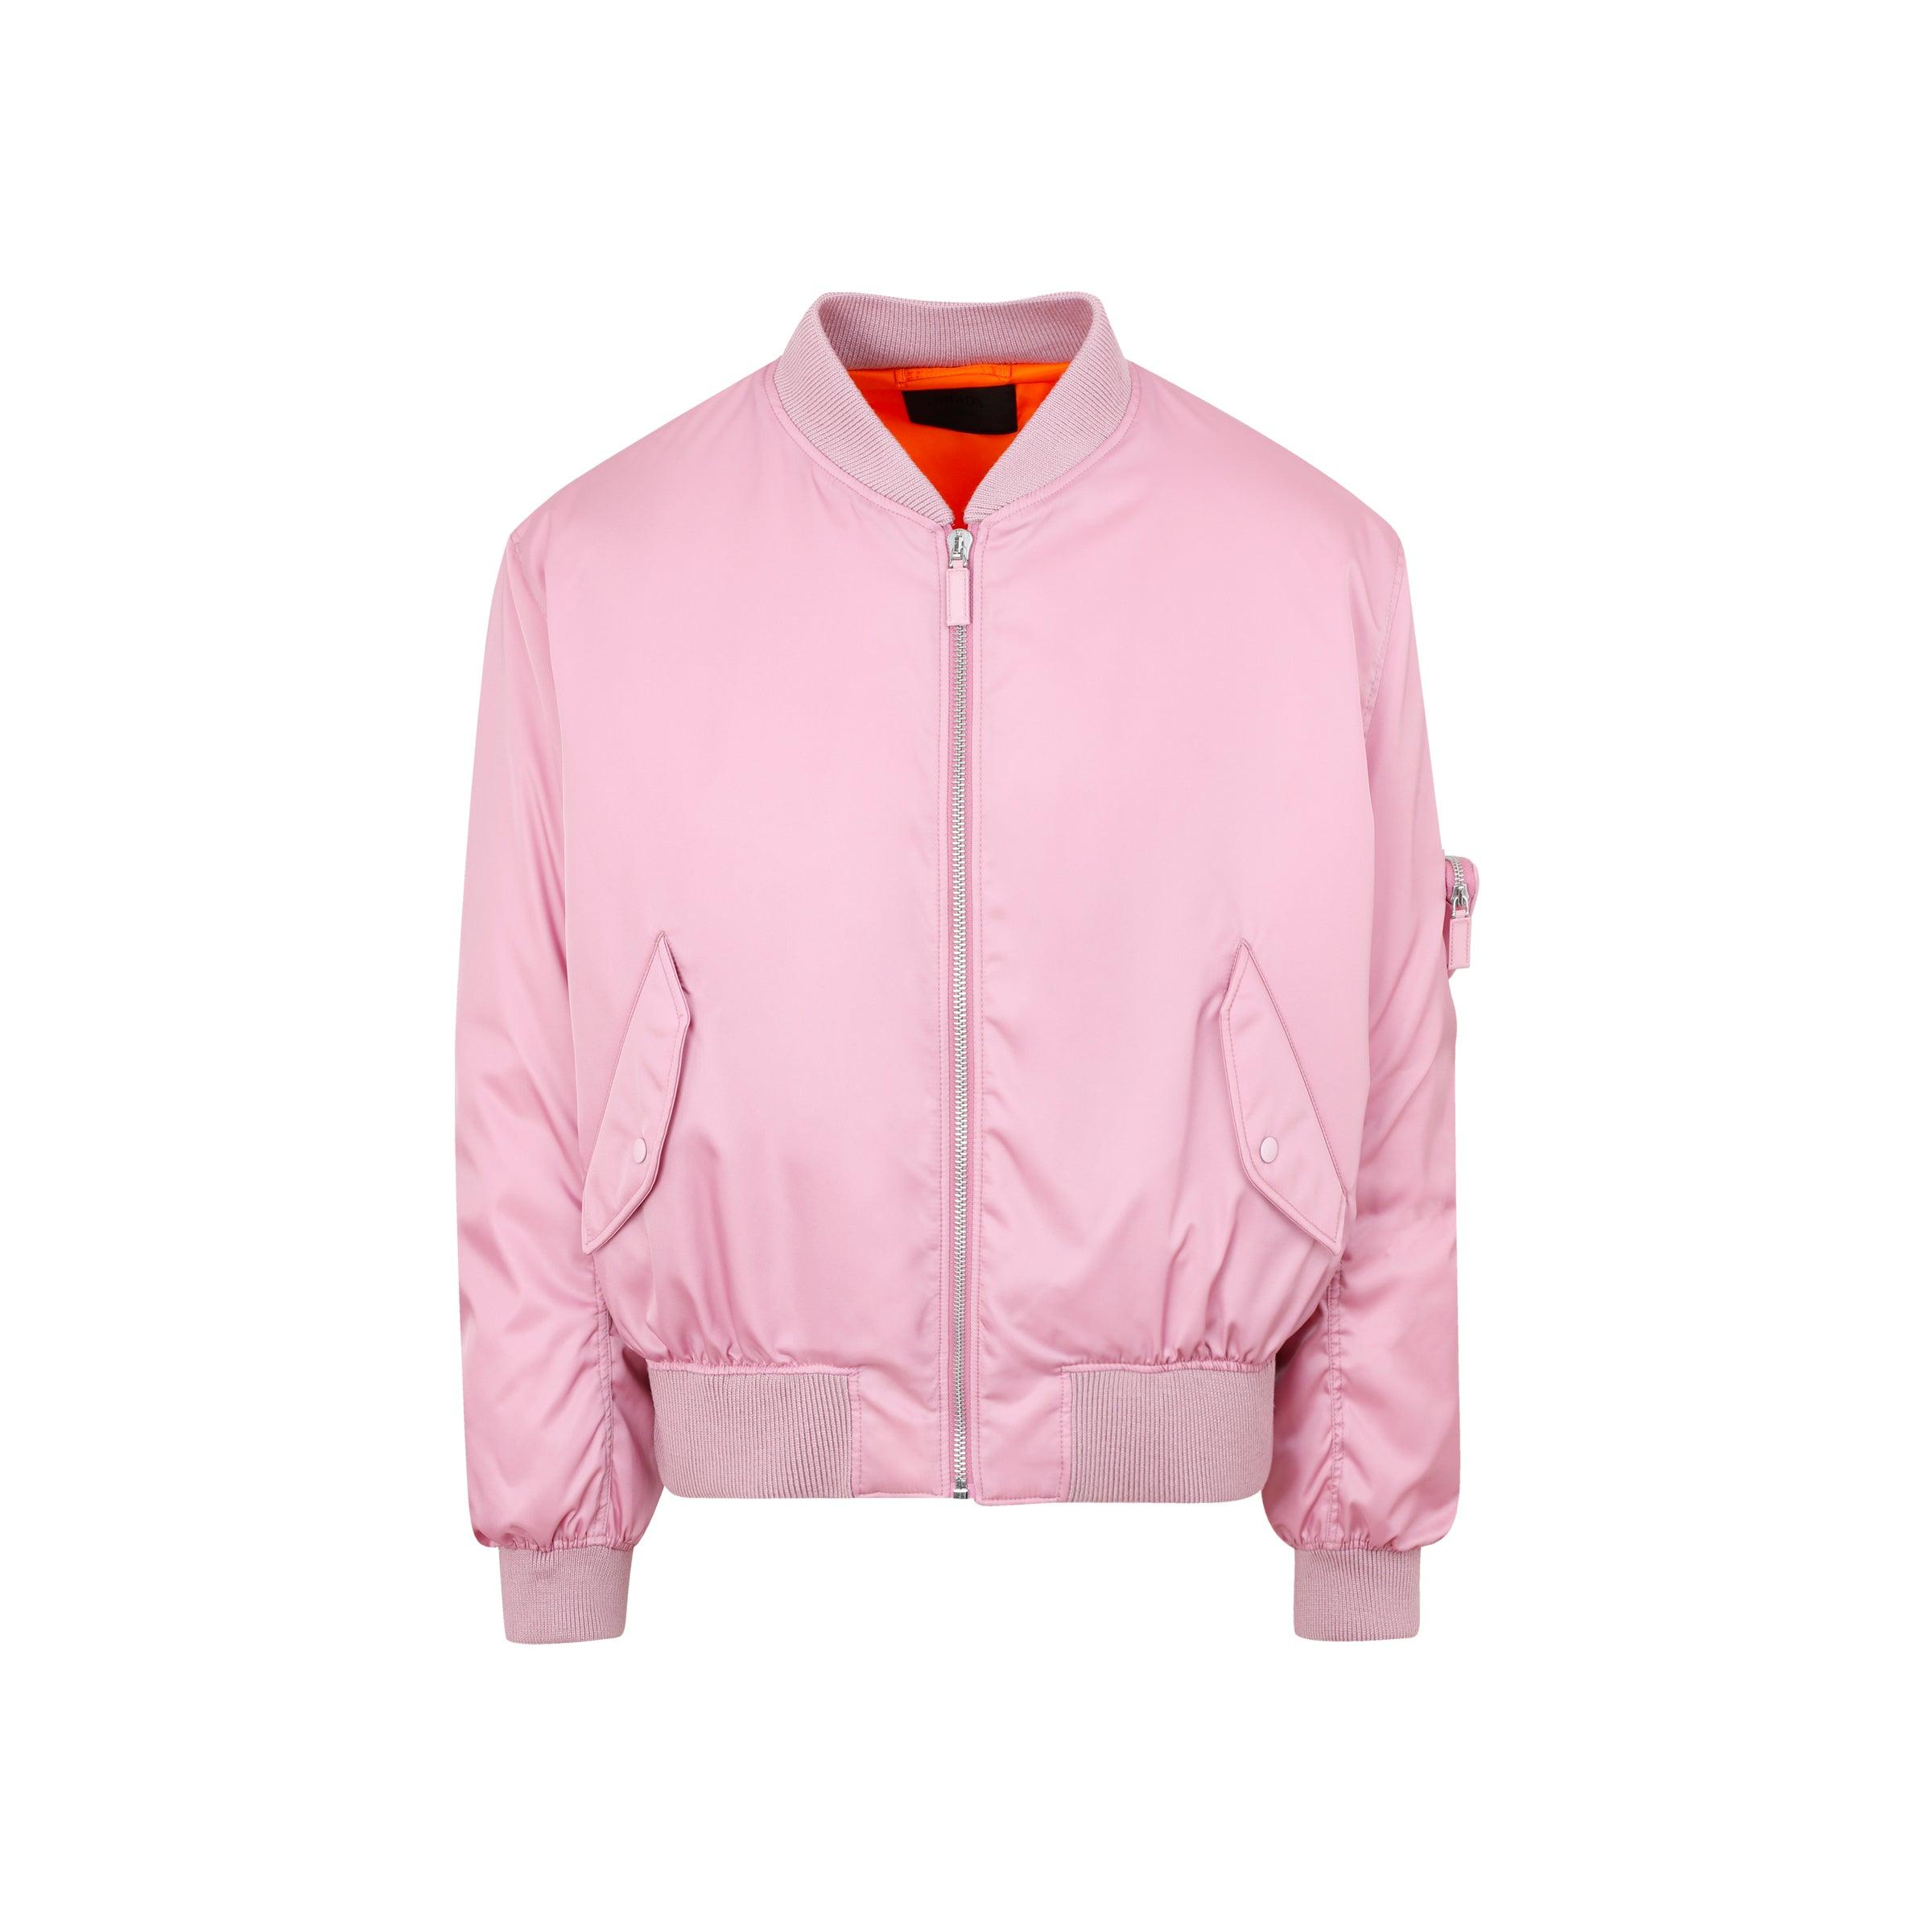 Prada Synthetic Re-nyon Bomber Jacket in Pink for Men - Lyst